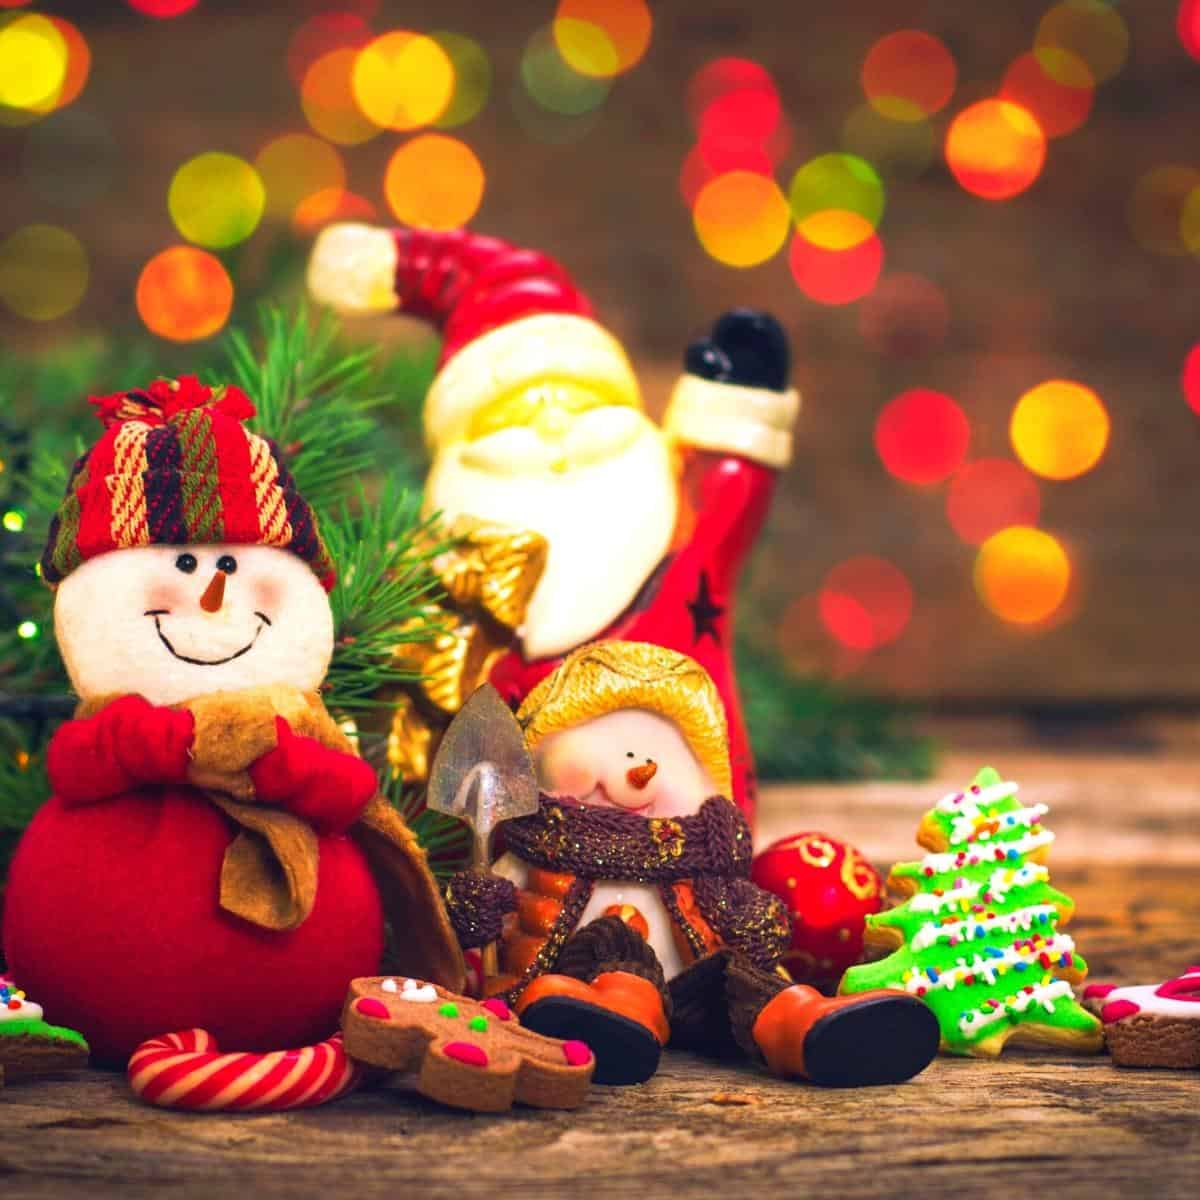 How to reduce financial stresses before Christmas